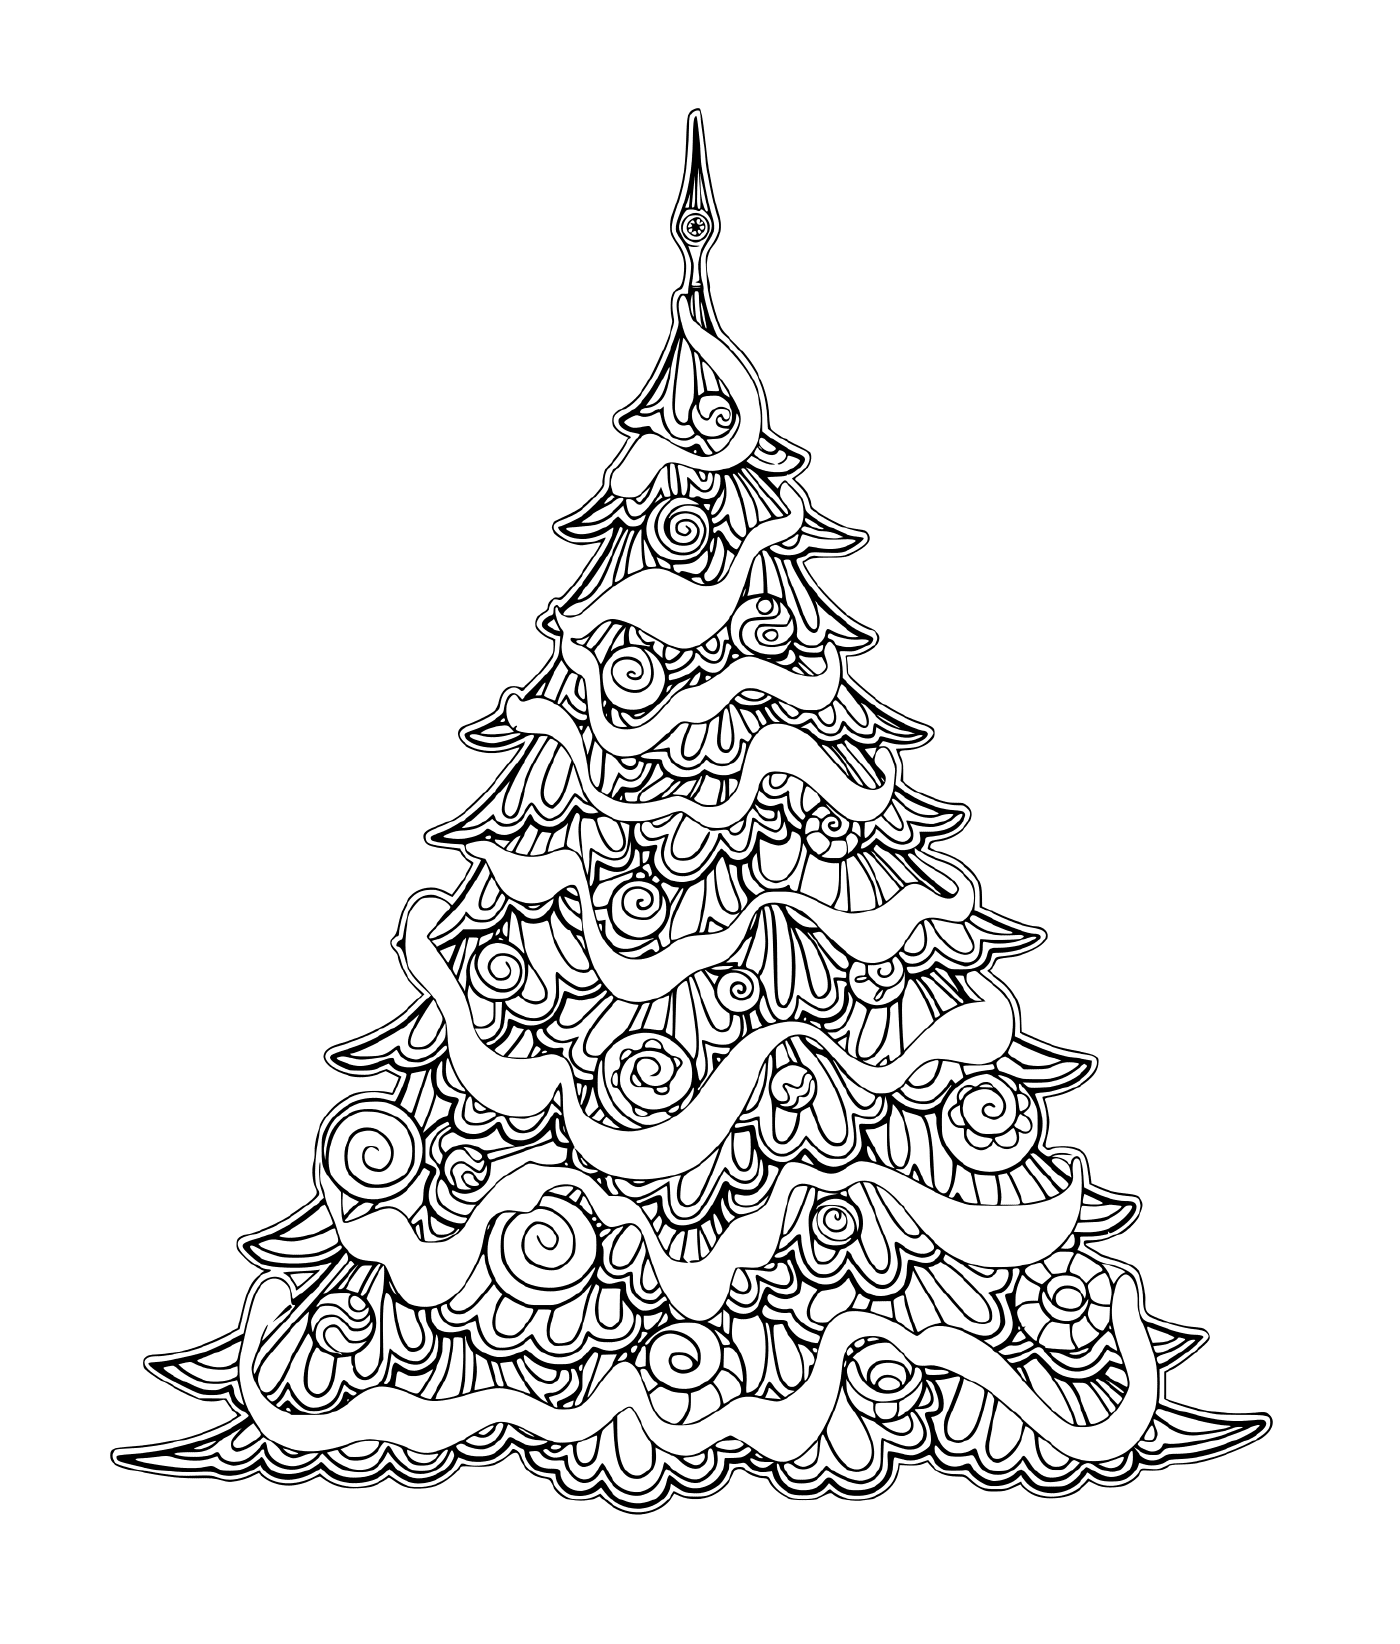  Luxurious Christmas tree with decorations 